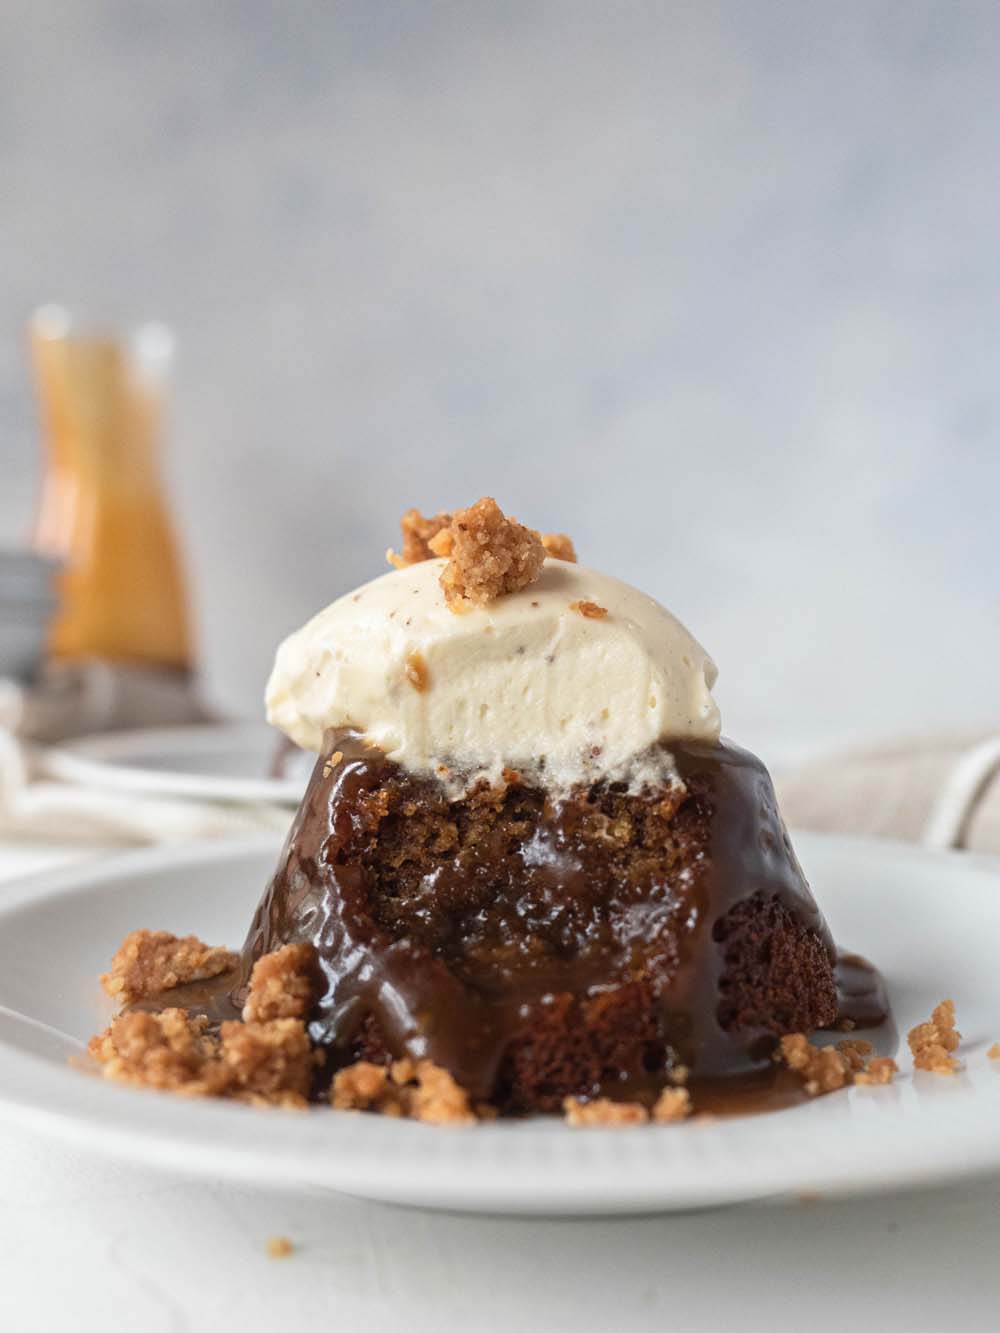 BEST Sticky Date Puddings with Walnut Crumble - Catherine Zhang